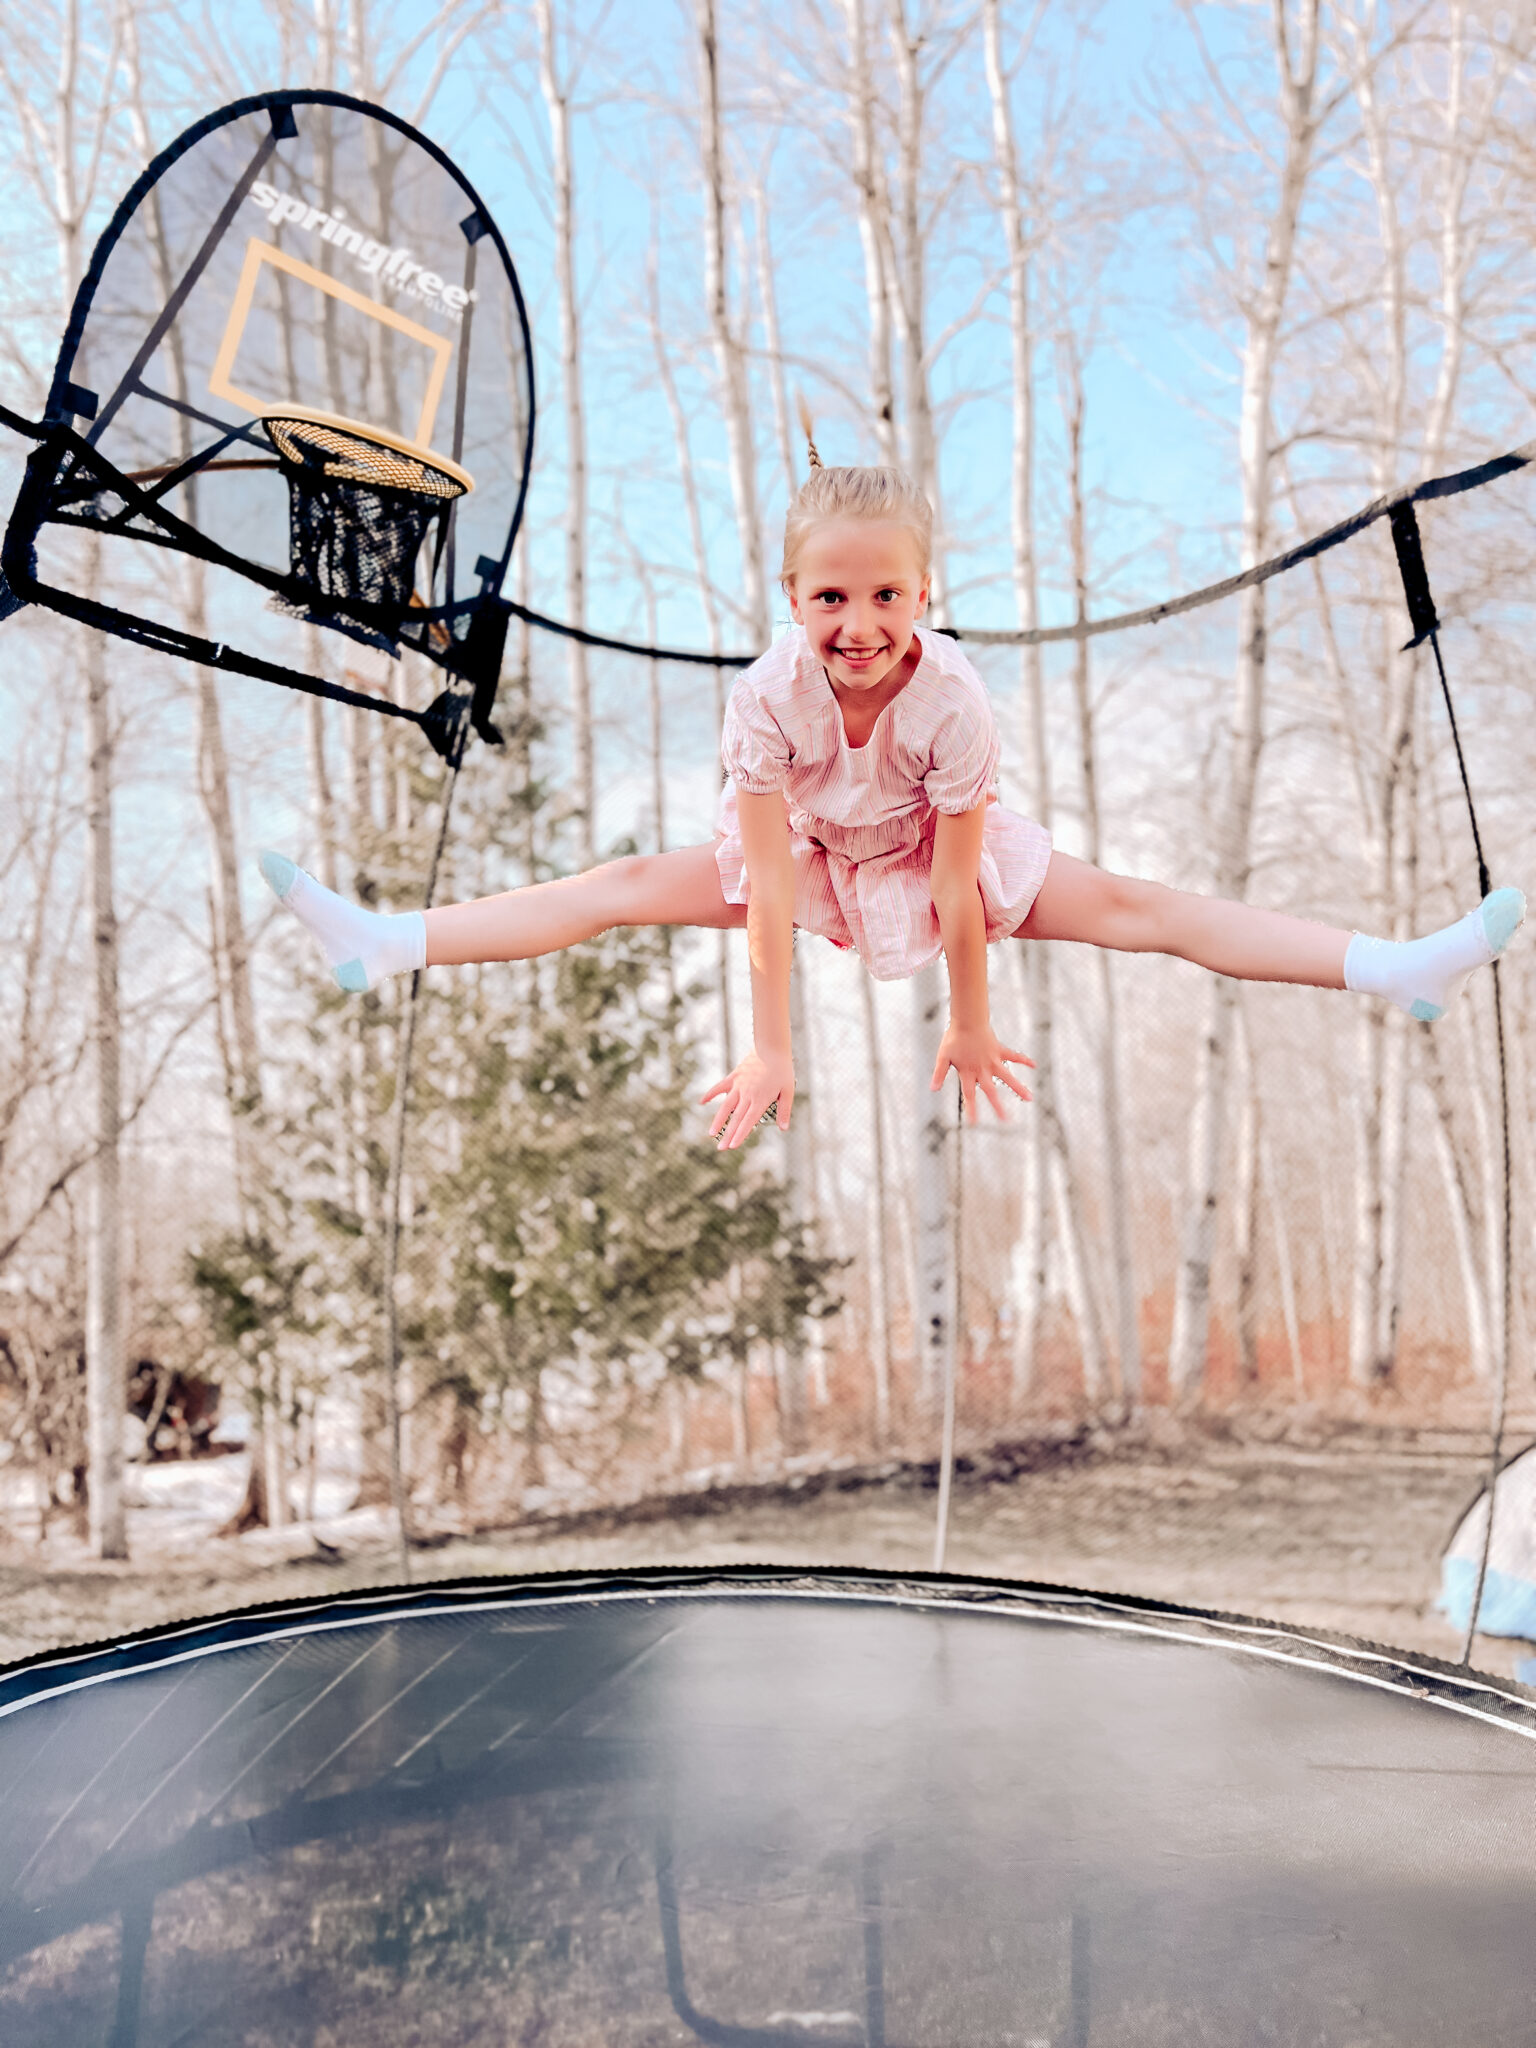 A review of the safest trampoline in the world, Springfree trampolines get kids outdoors, active, and making memories all summer as a family. Family Fun | Outdoors | Activities | Exercise | Backyard Fun | Birthday Parties | Movie Night | Camping | Summertime | Sumer Fun | Children | Motherhood | Parenting | Summer Ideas | Safety | Safest |